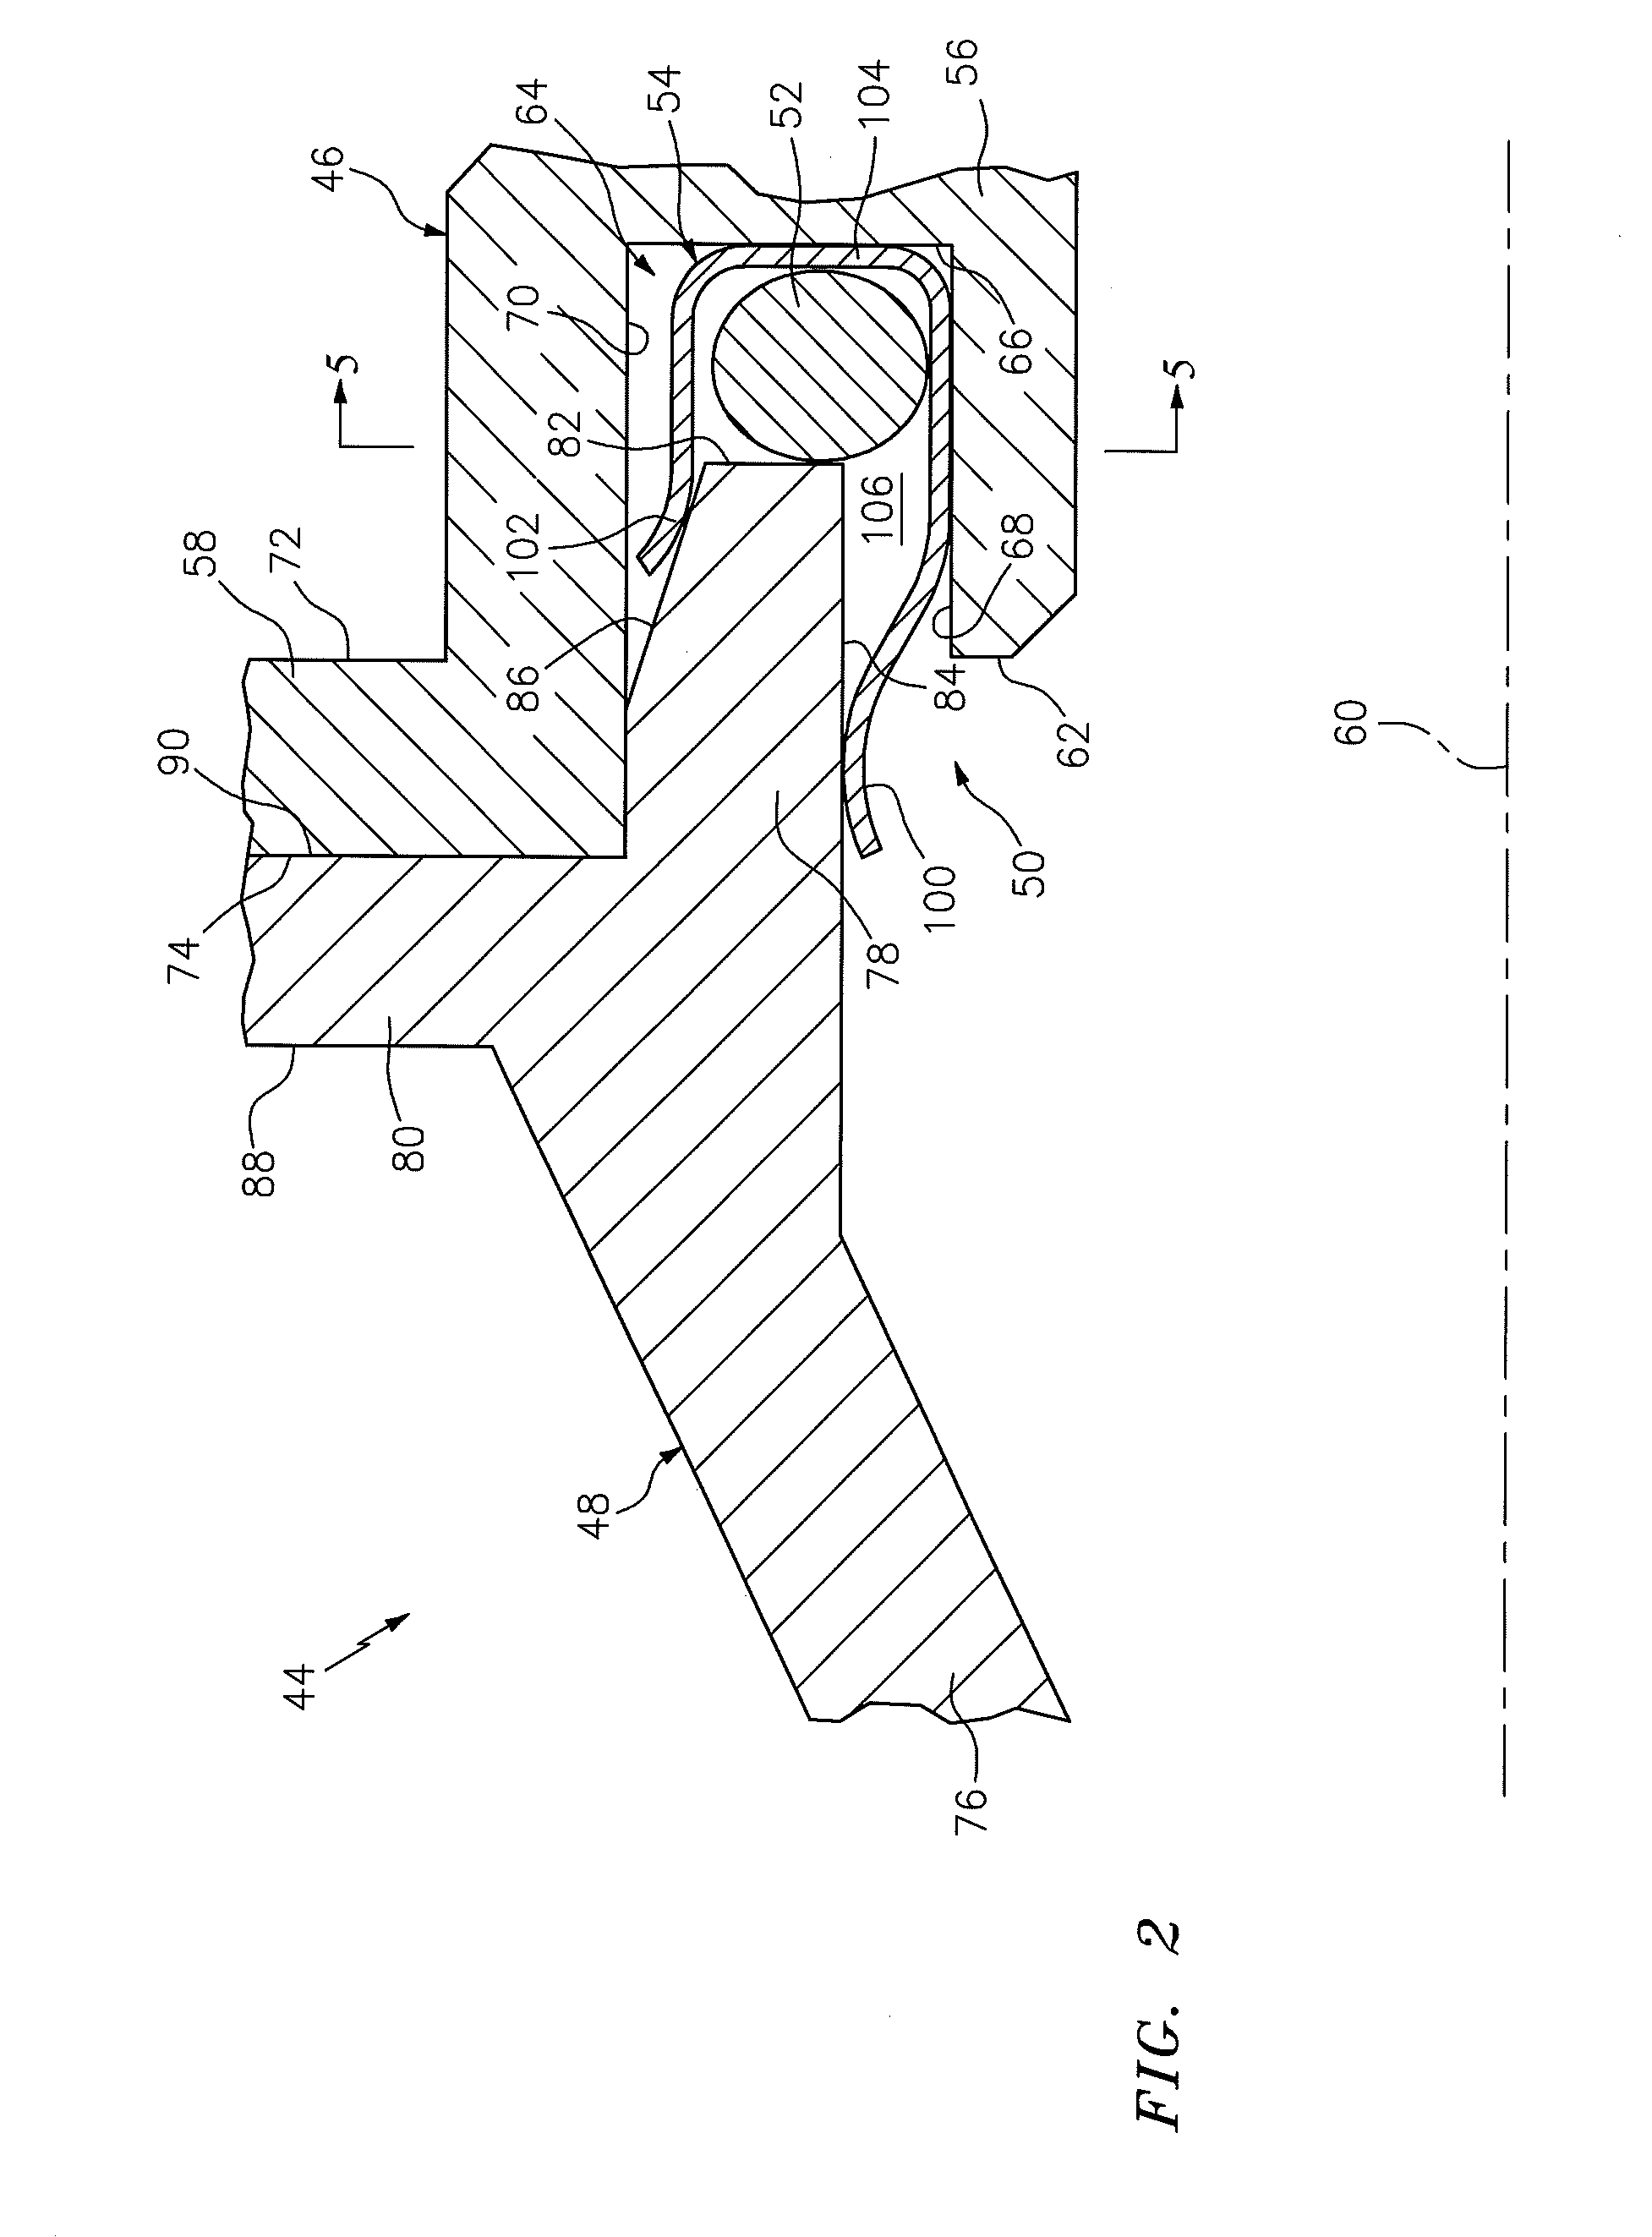 Assembly for sealing a gap between components of a turbine engine